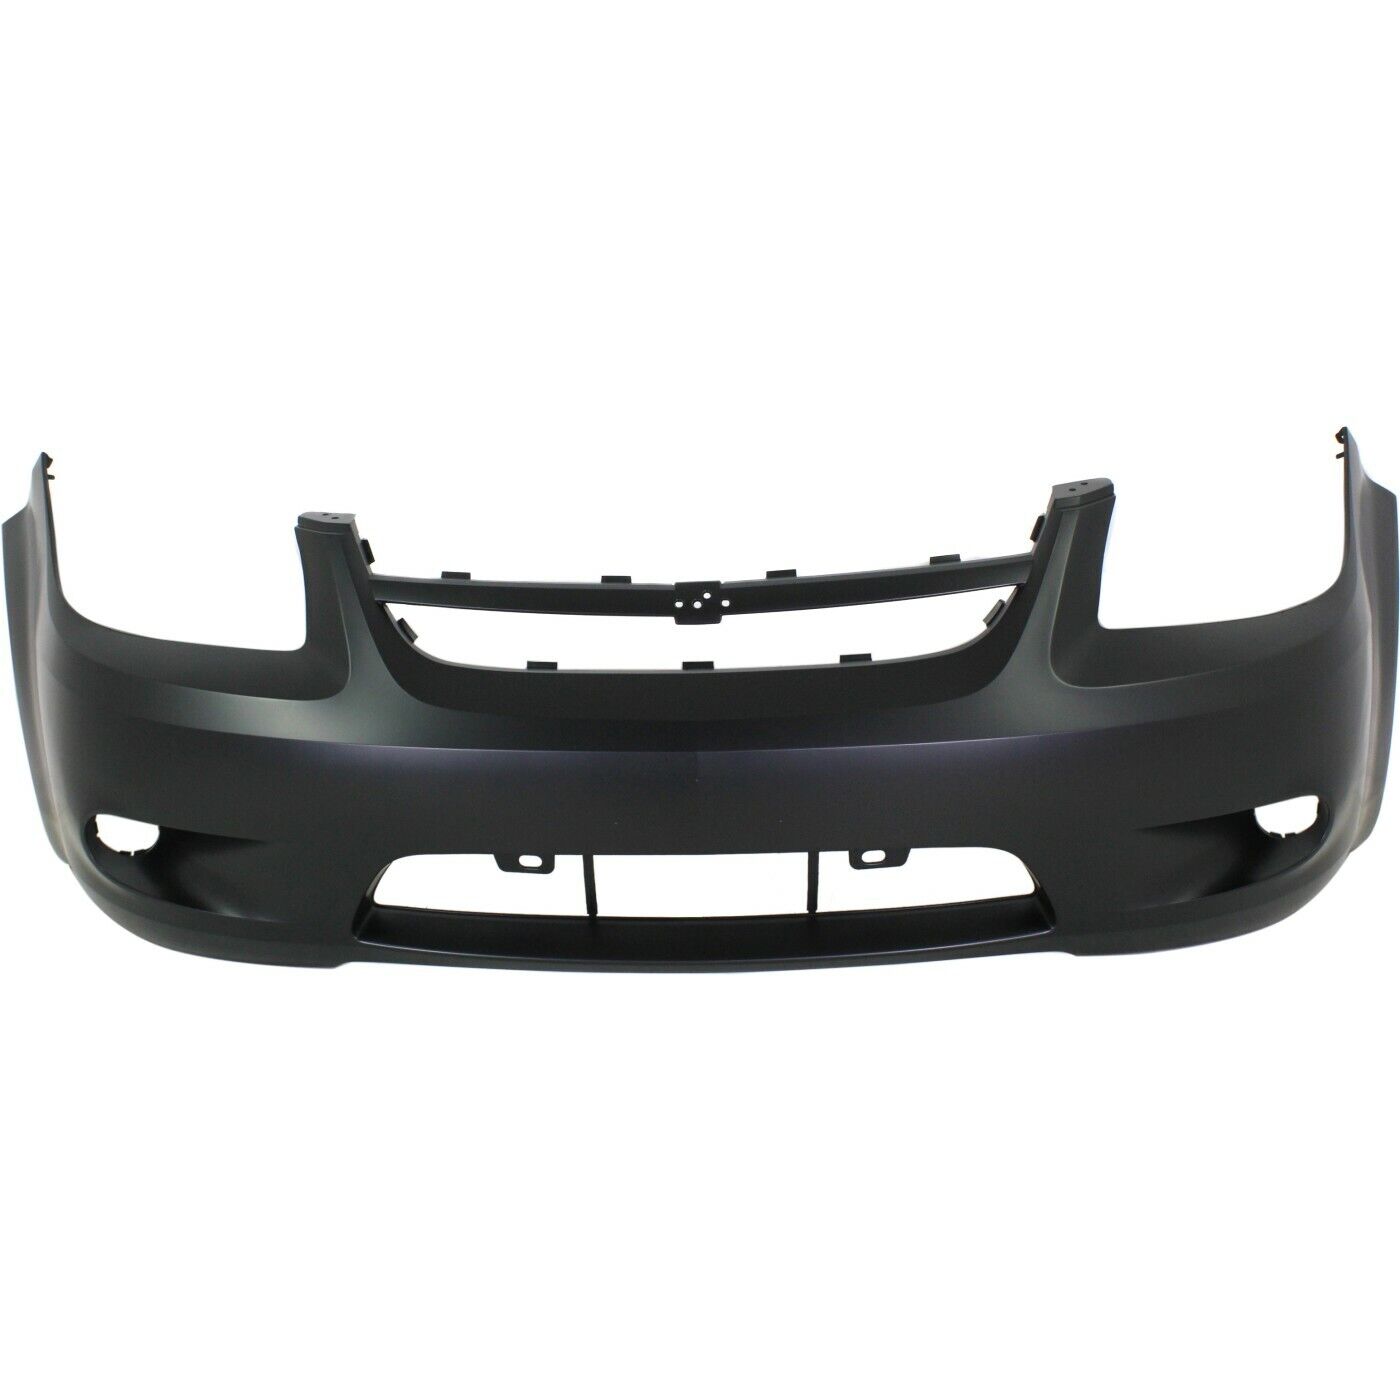 Front Bumper Cover For 2006-2010 Chevy Cobalt w/ fog lamp holes Primed